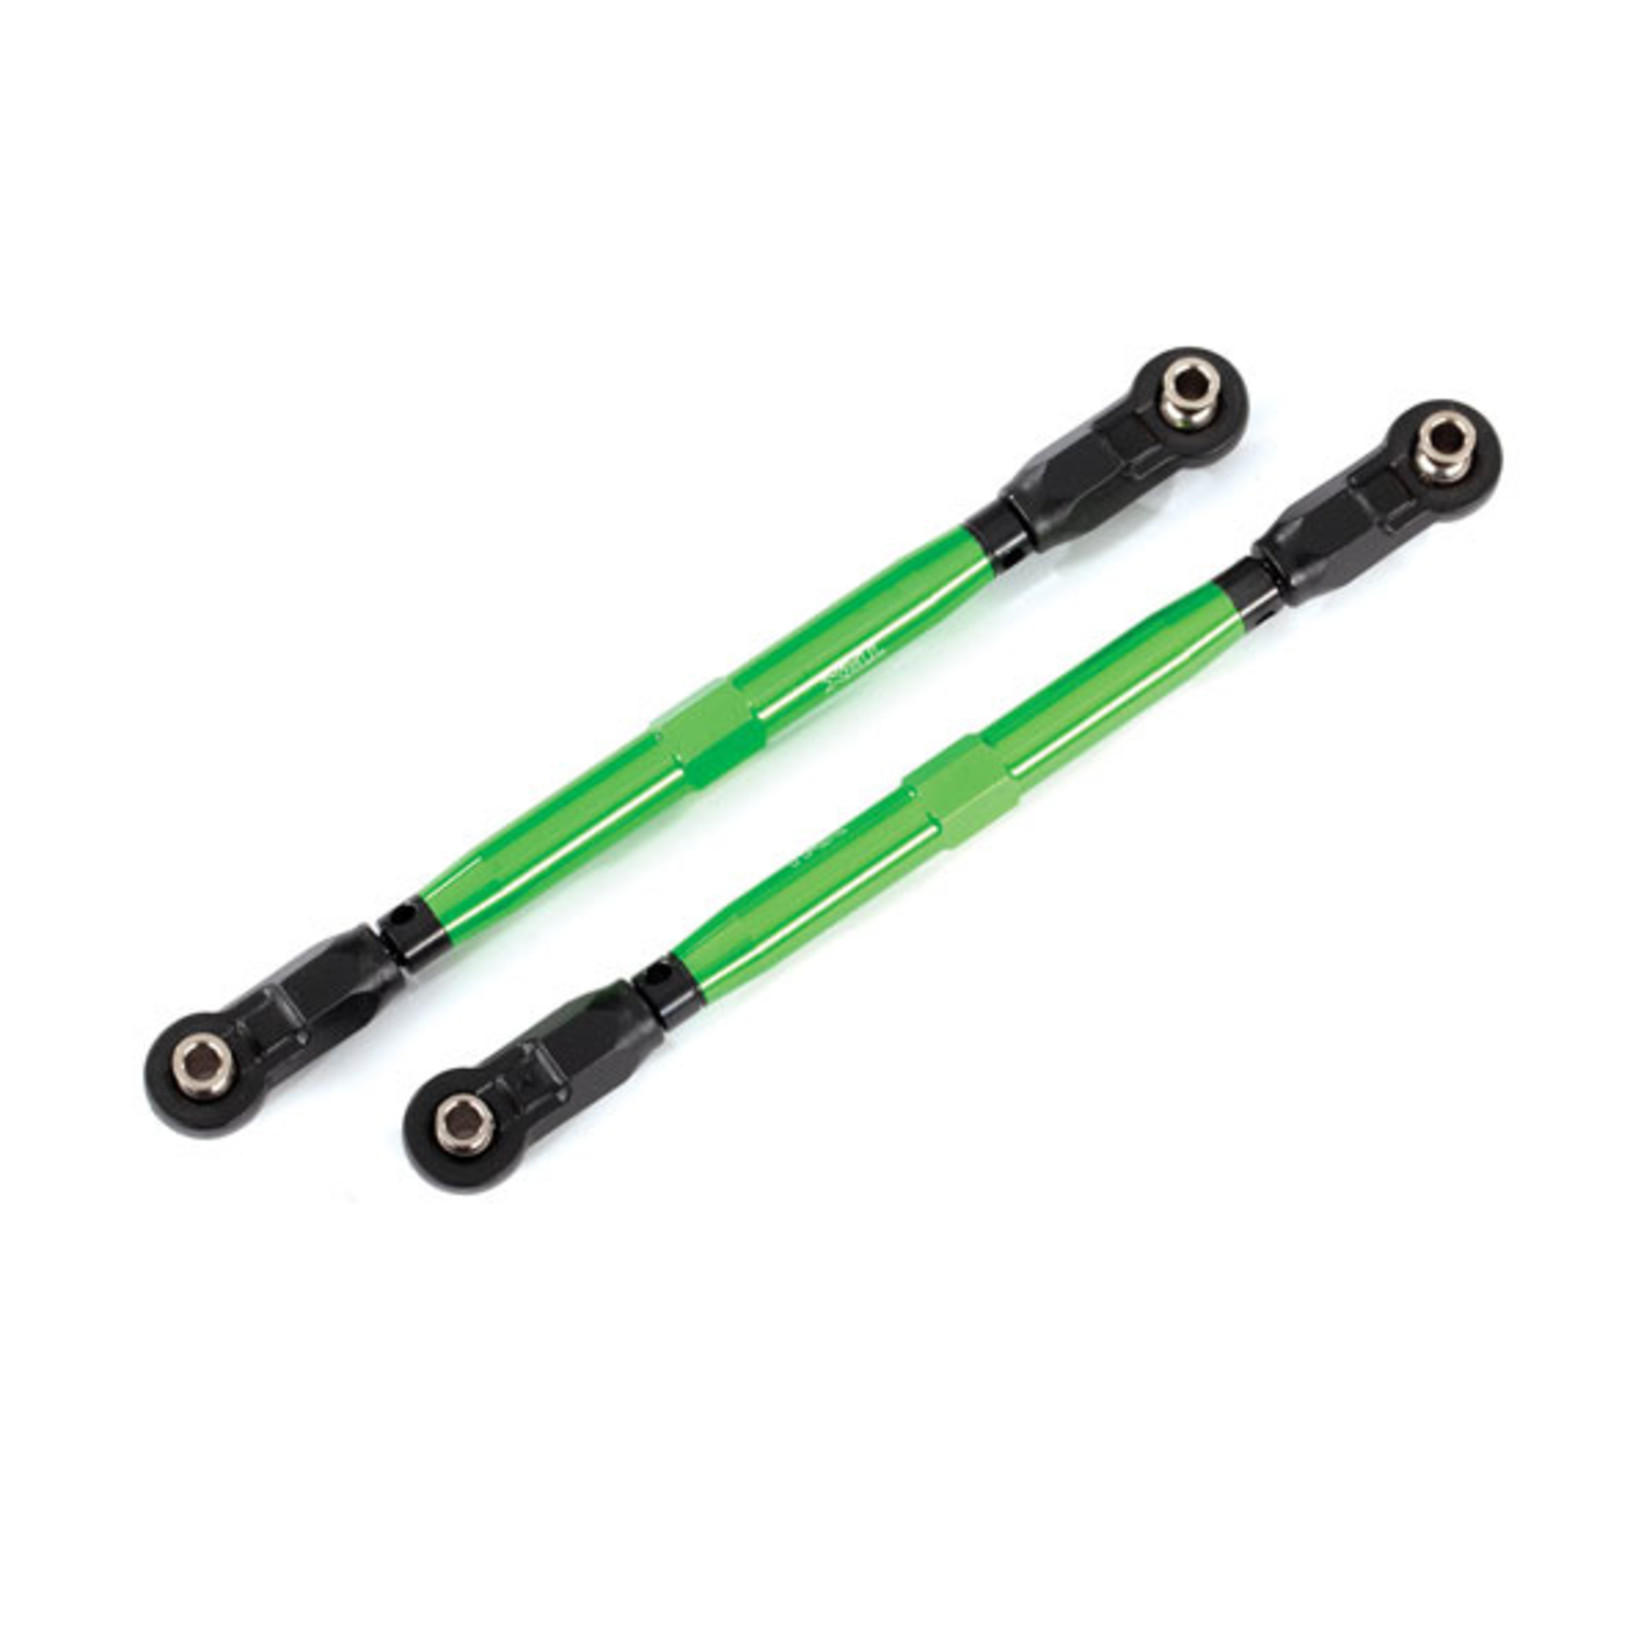 Traxxas 8997G - Toe links, front (TUBES green-anodized, 70